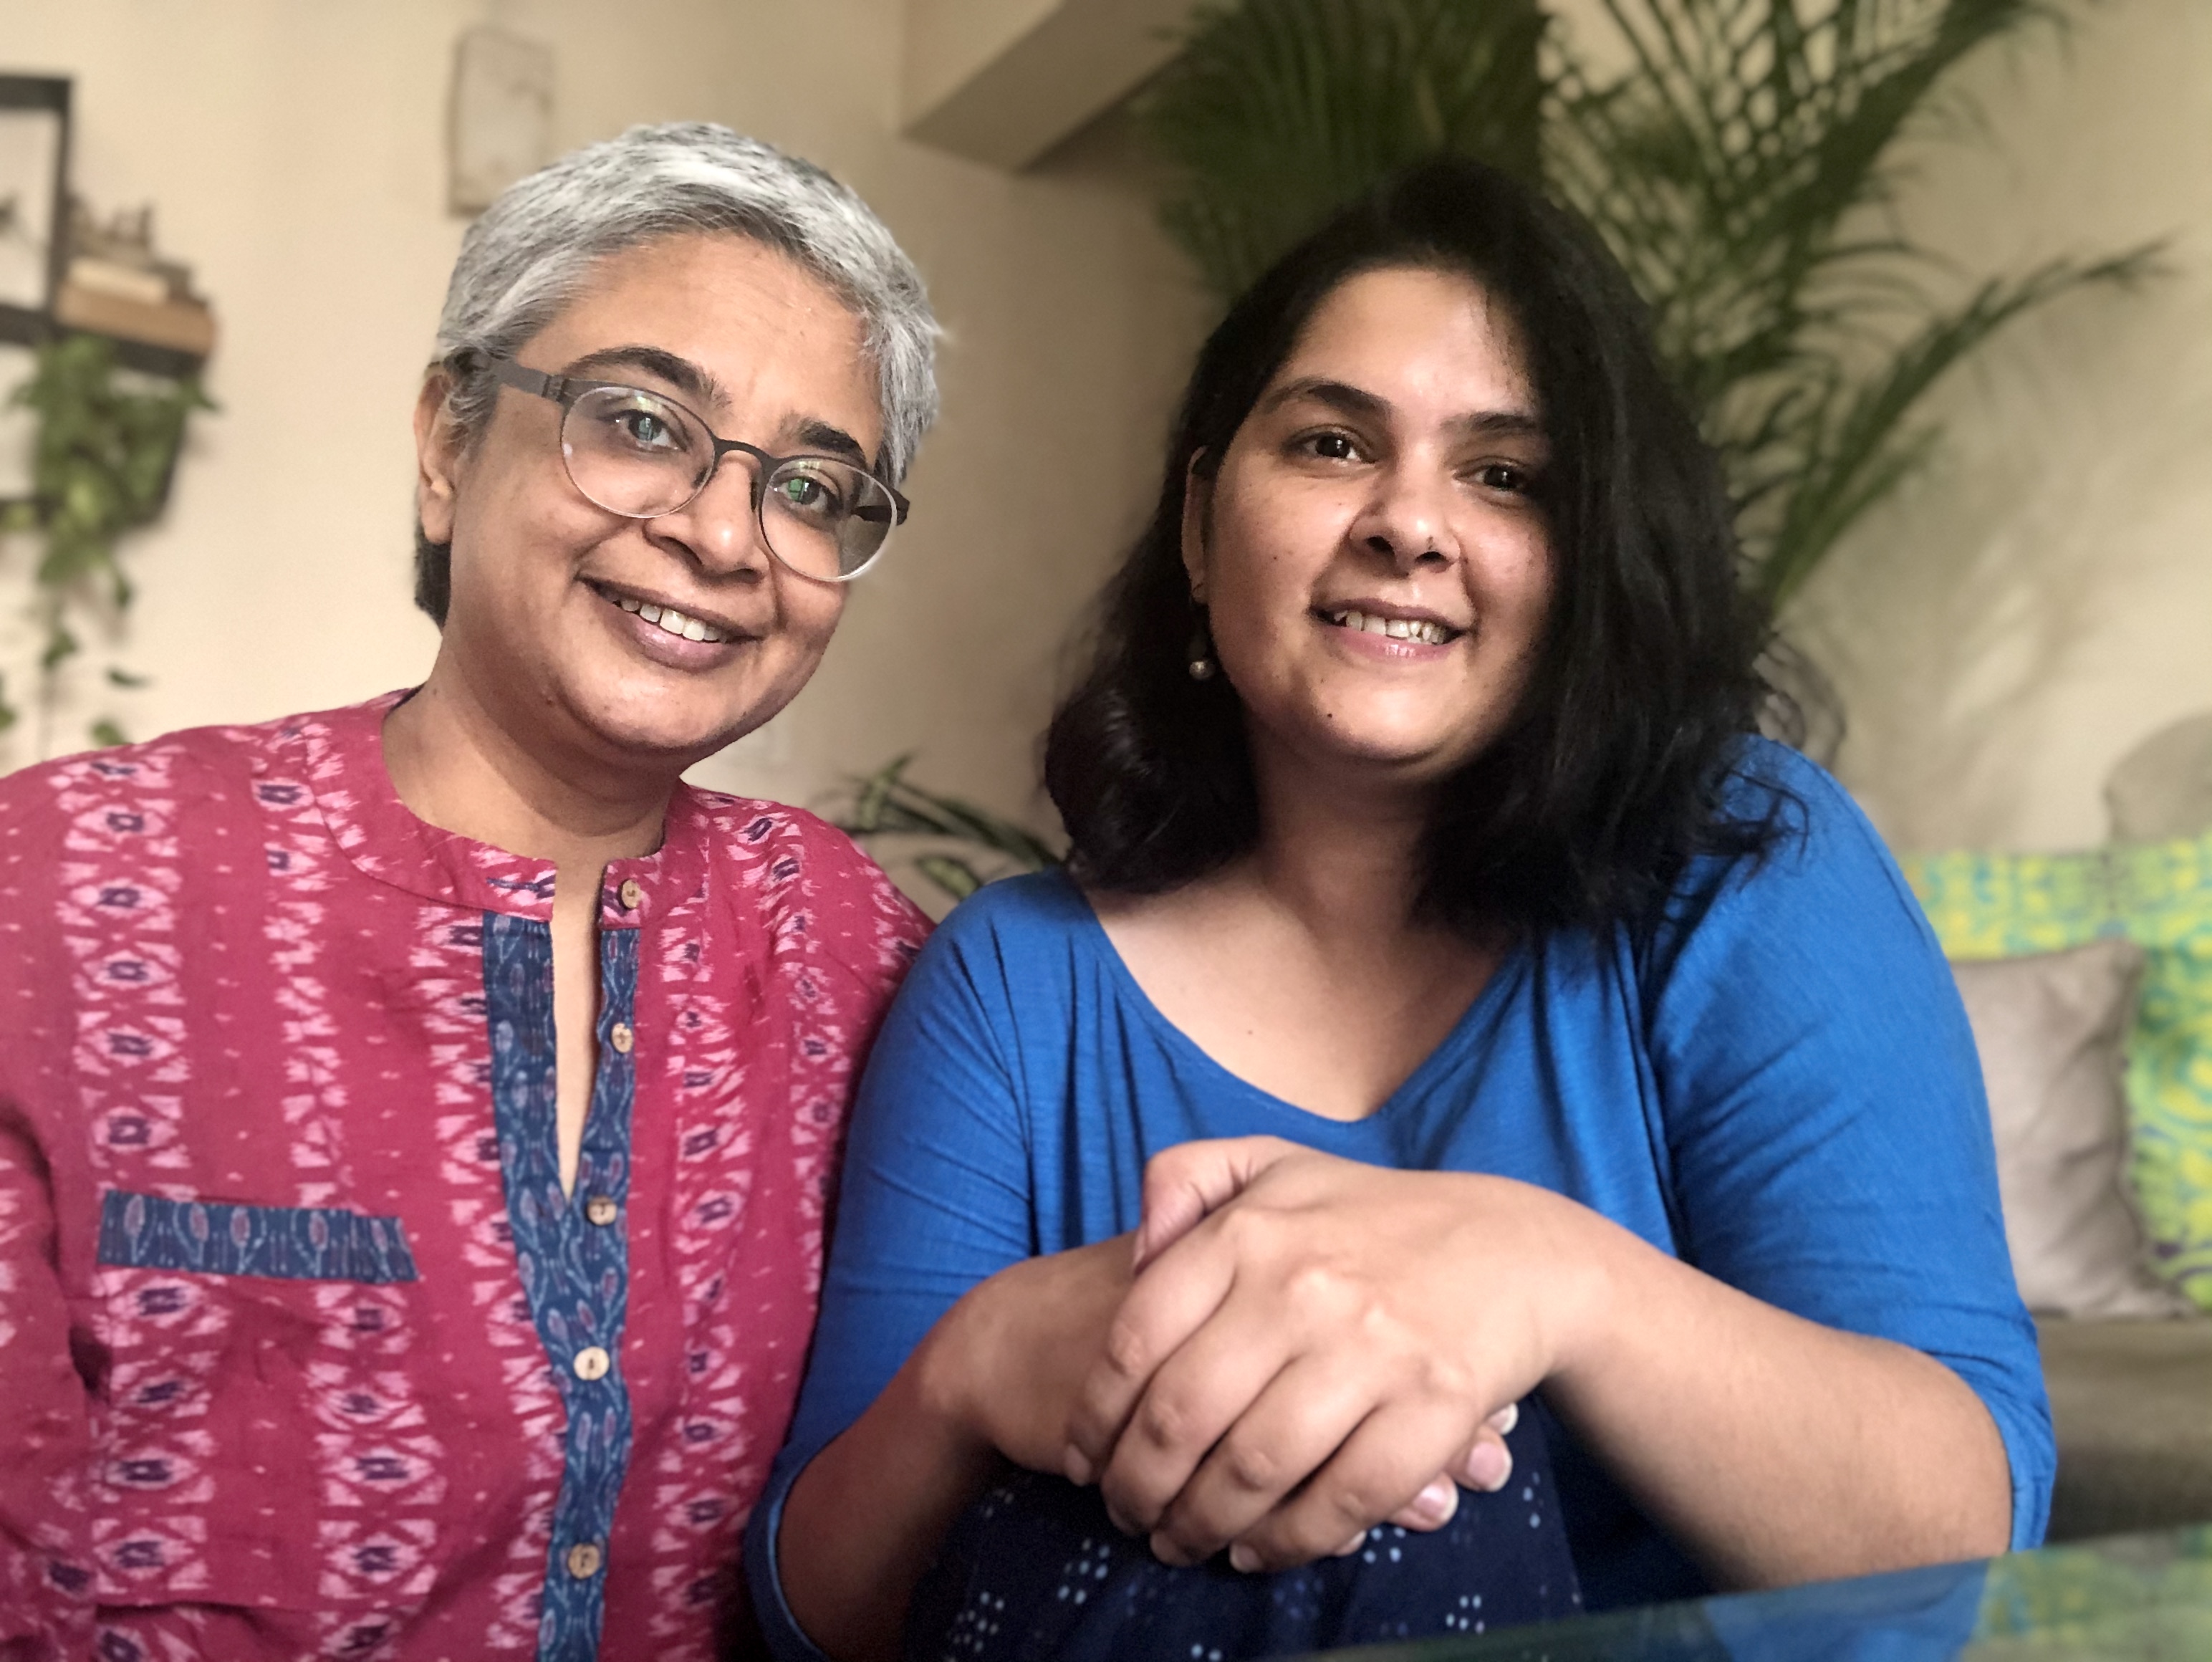 Is India Ready to Legalize LGBTQ Marriage? Time photo